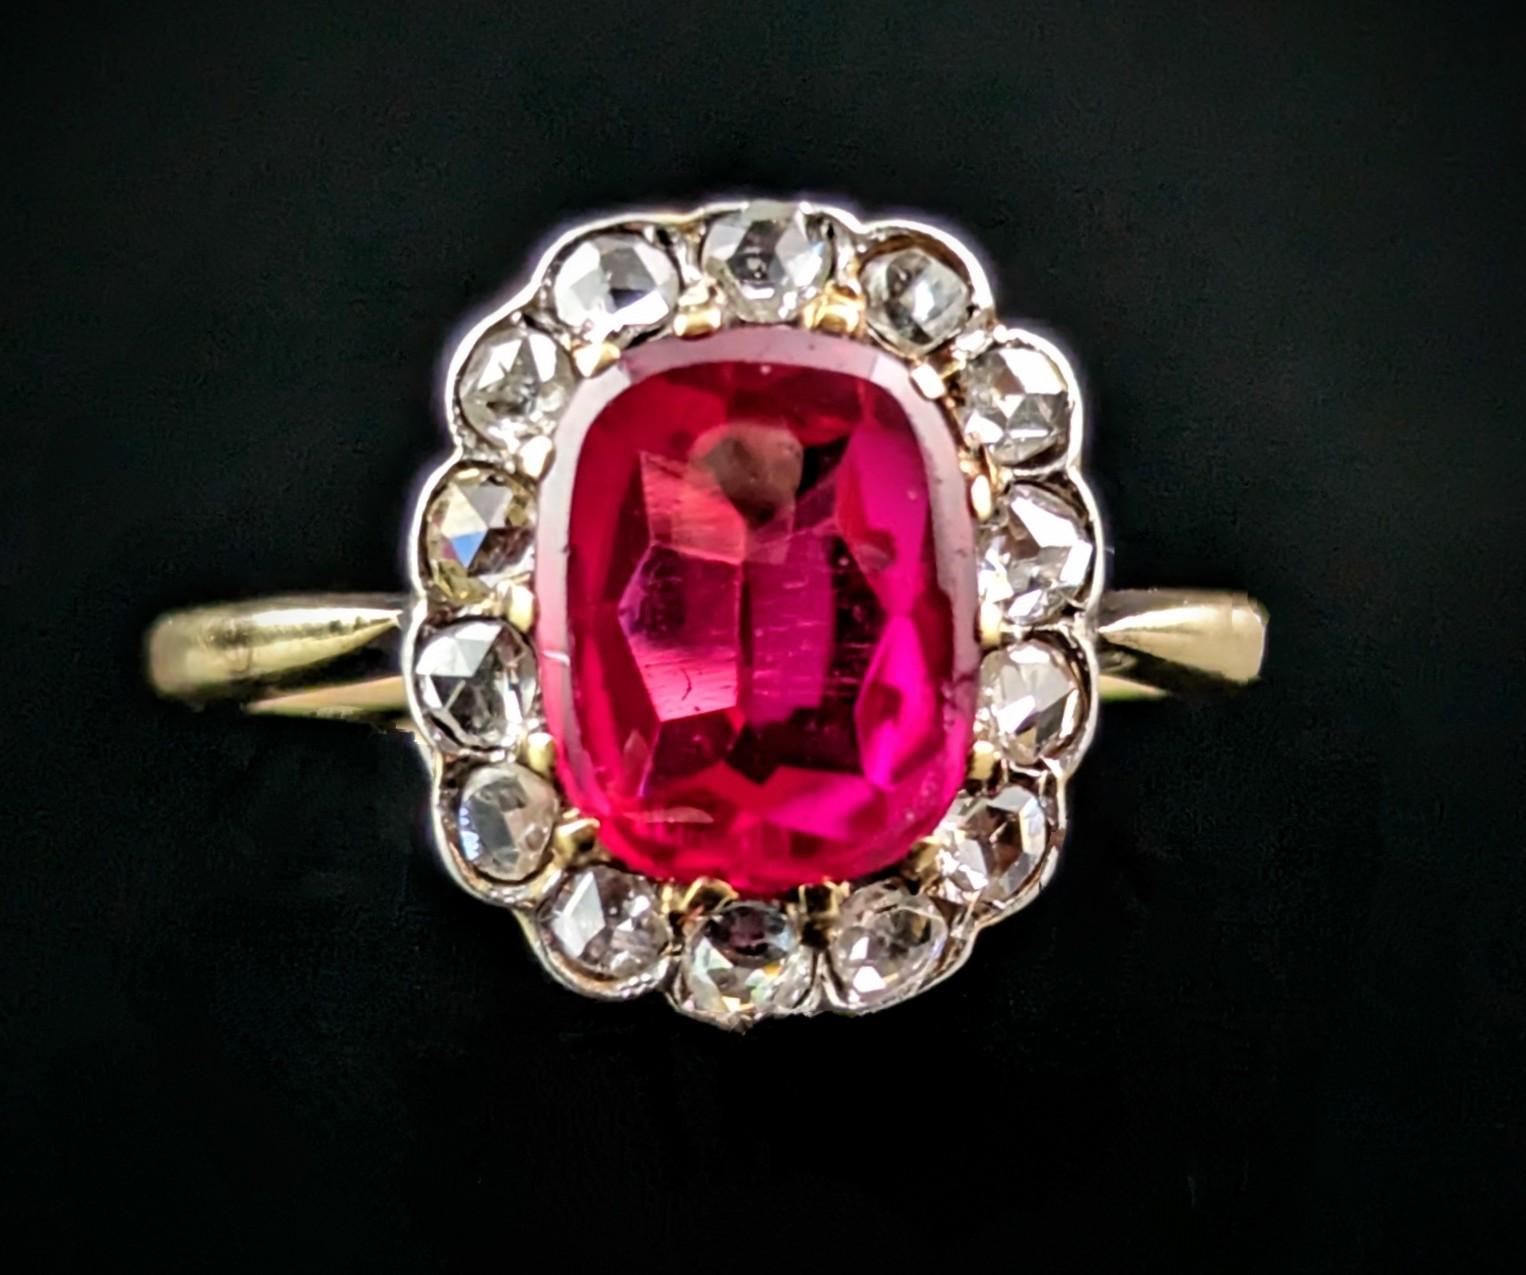 This Art Deco era Synthetic Ruby and Rose cut diamond cluster ring is a real beauty.

The ring features a vibrant cushion cut synthetic ruby, the ruby has a smooth polished table almost like a flat cabochon and this gives a lovely glossy shine, it